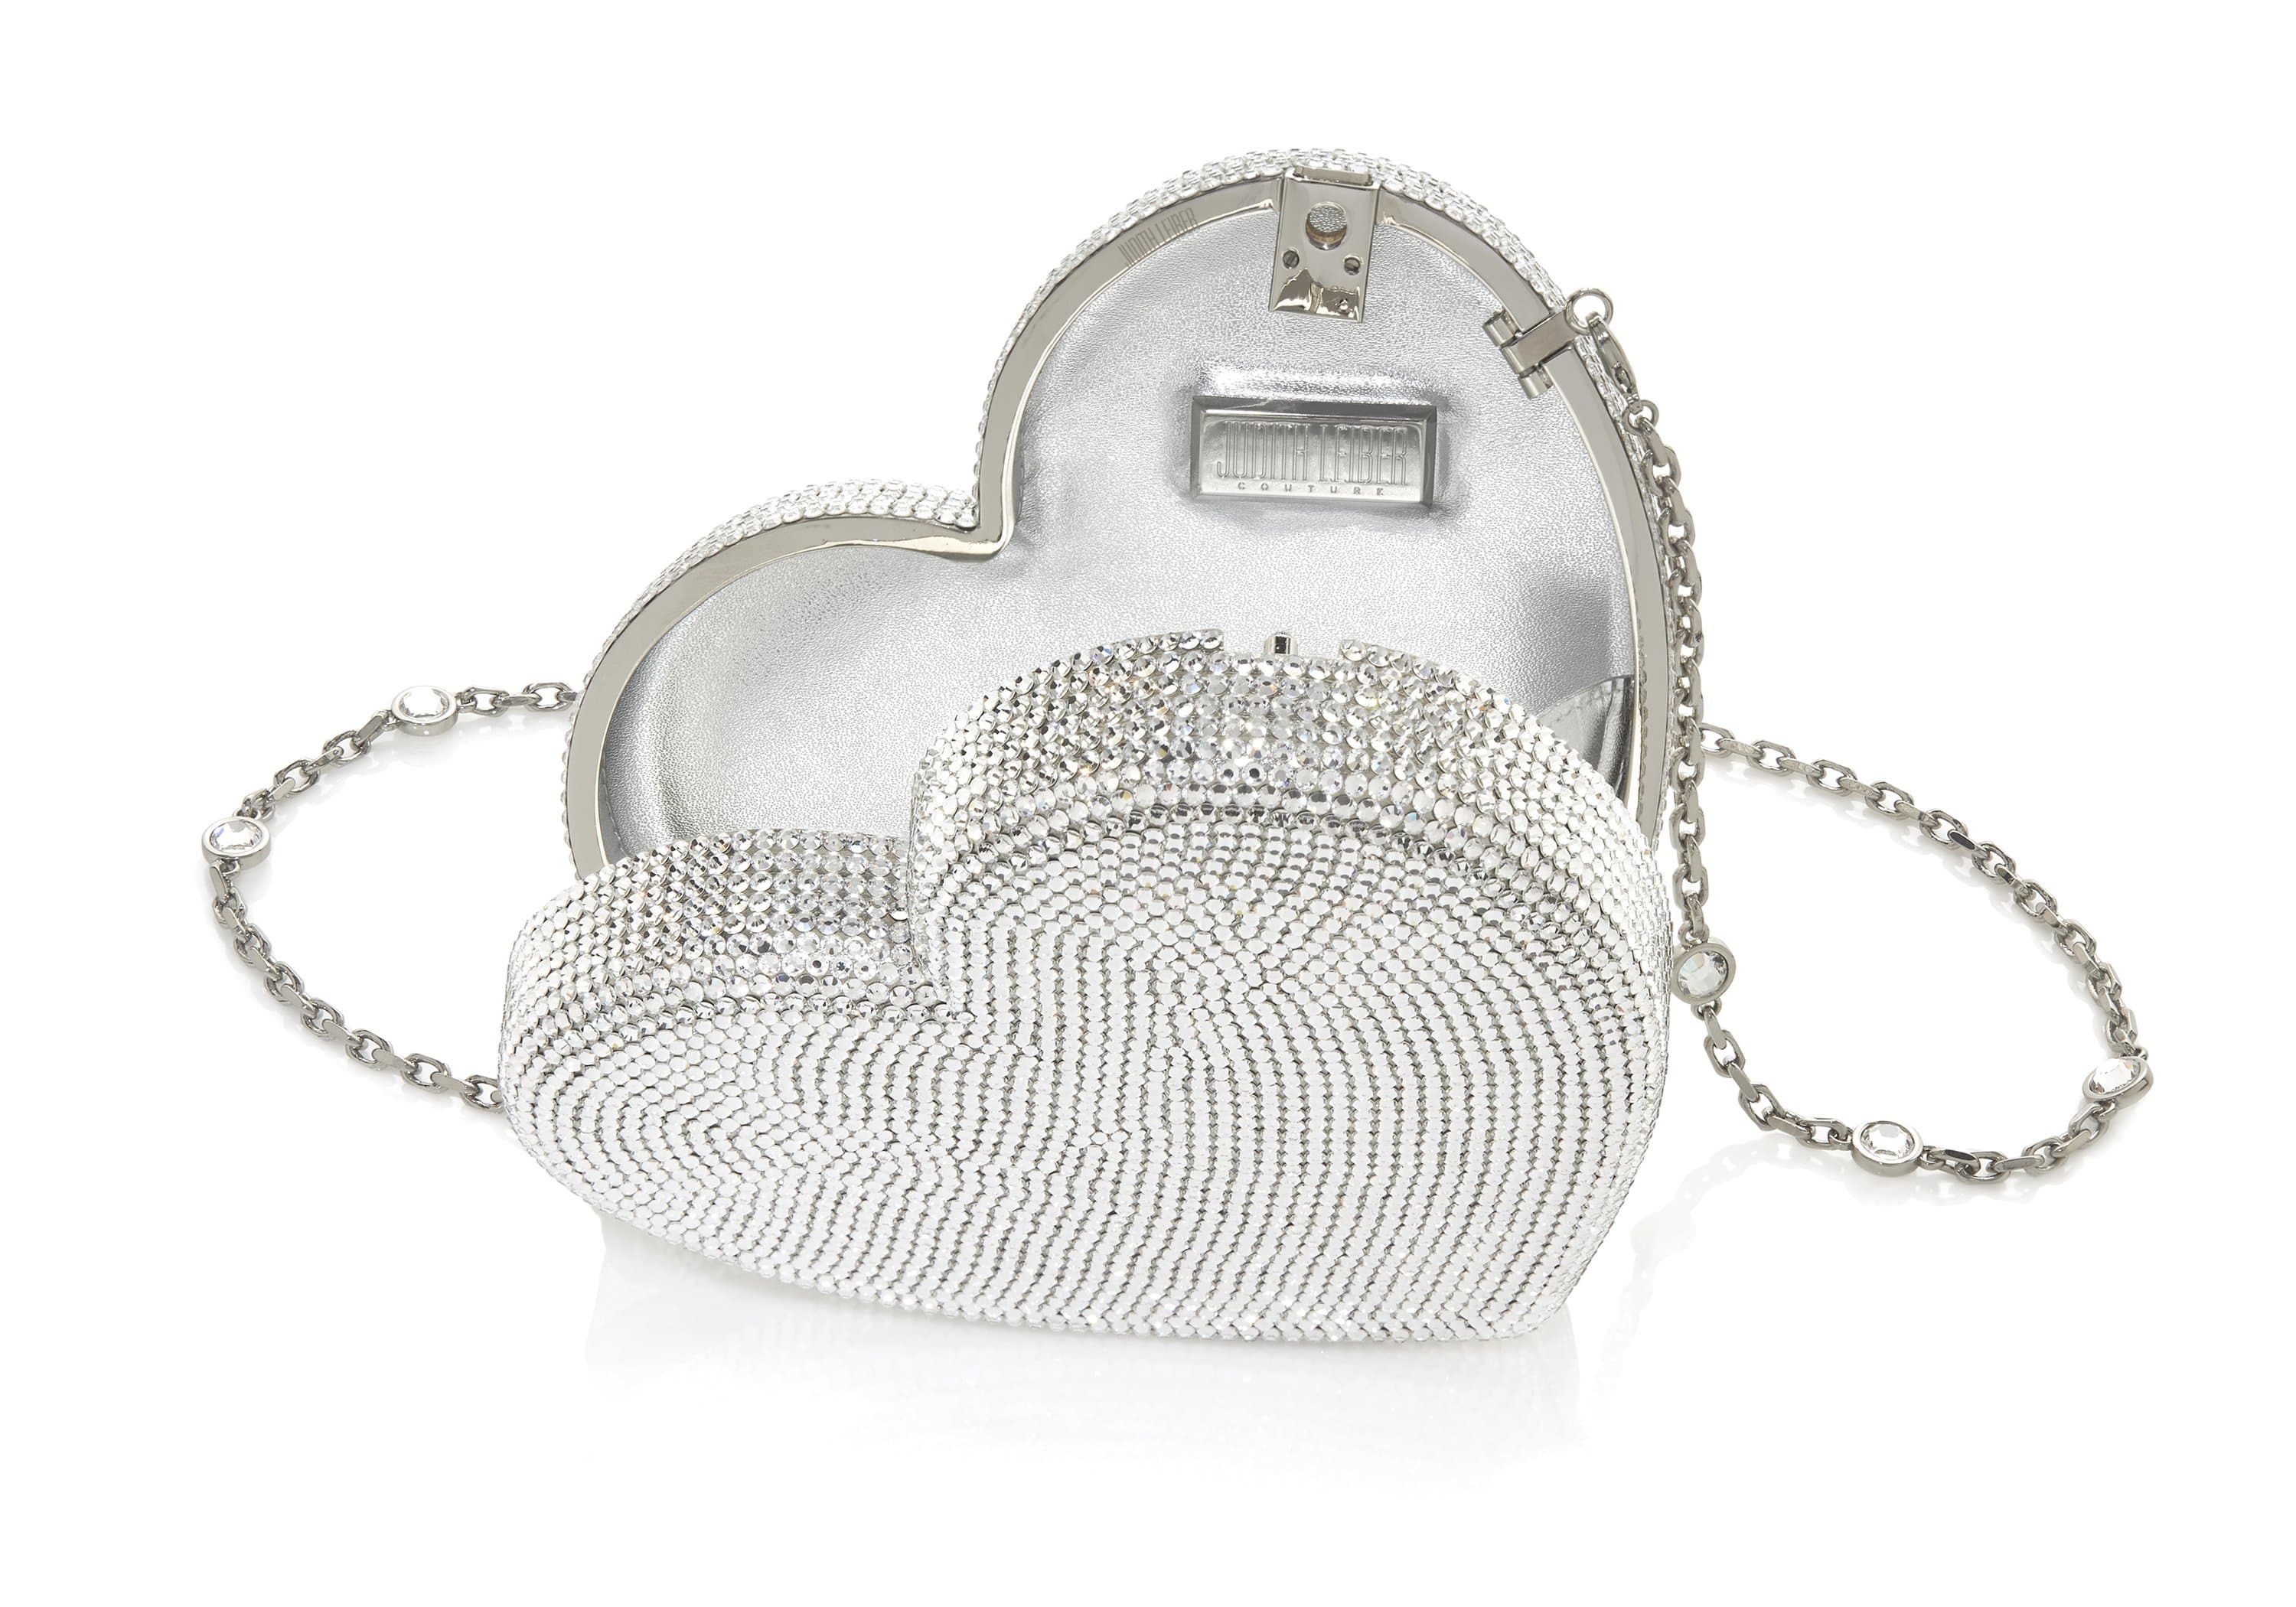 Judith Leiber Couture Heart Fully Beaded Clutch Bag